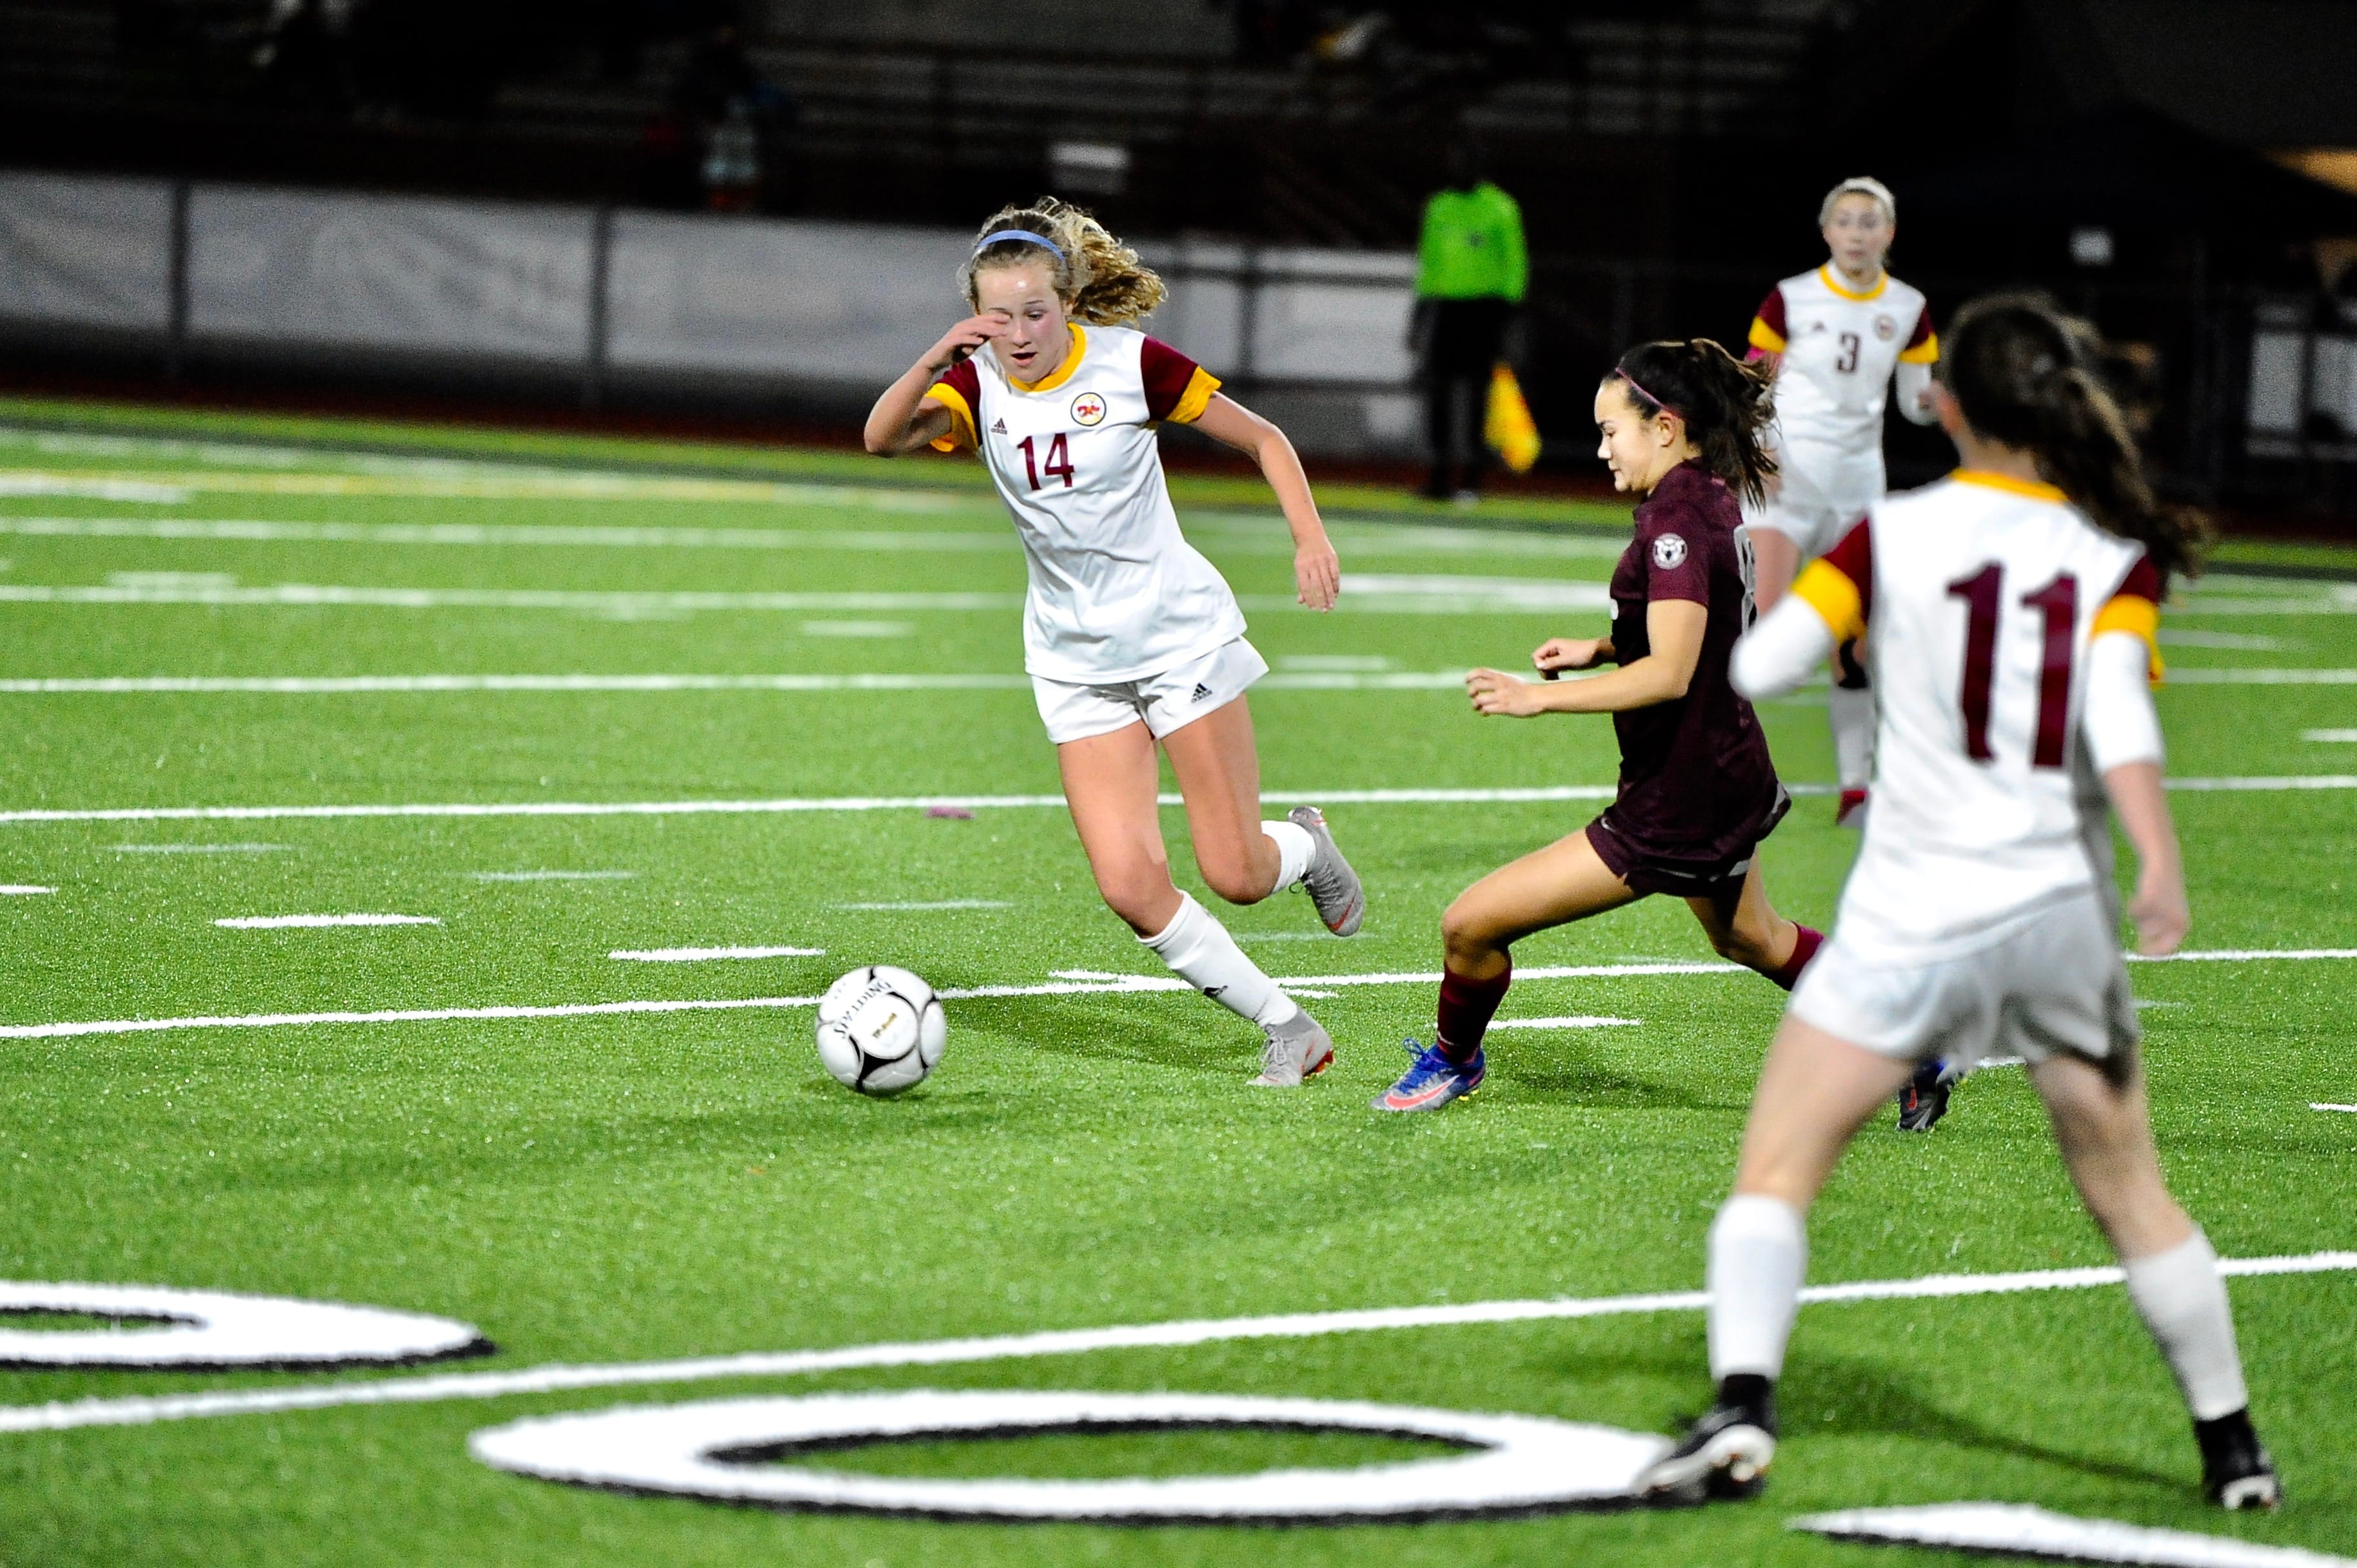 Prairie midfielder Maya Davis dribbles past a defender in the second half of a 3-1 loss to Holy Names in the 3A state semifinals at Puyallup's Sparks Stadium.